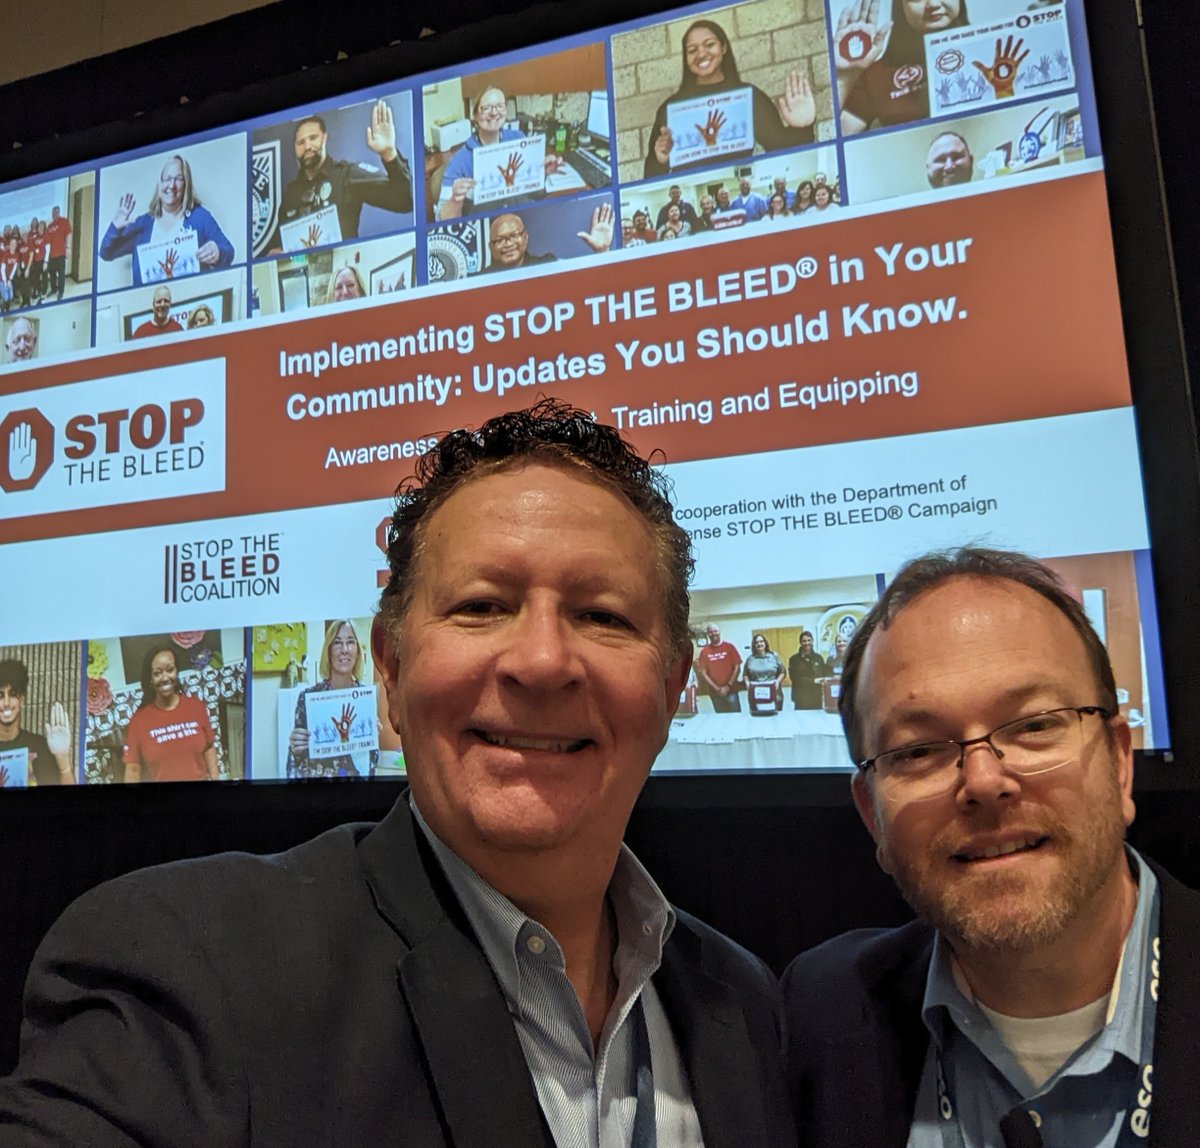 I had the chance to team up with @drmattlevy at #EMSWorldExpo to talk about how #communities can implement #stopthebleed. #beprepared